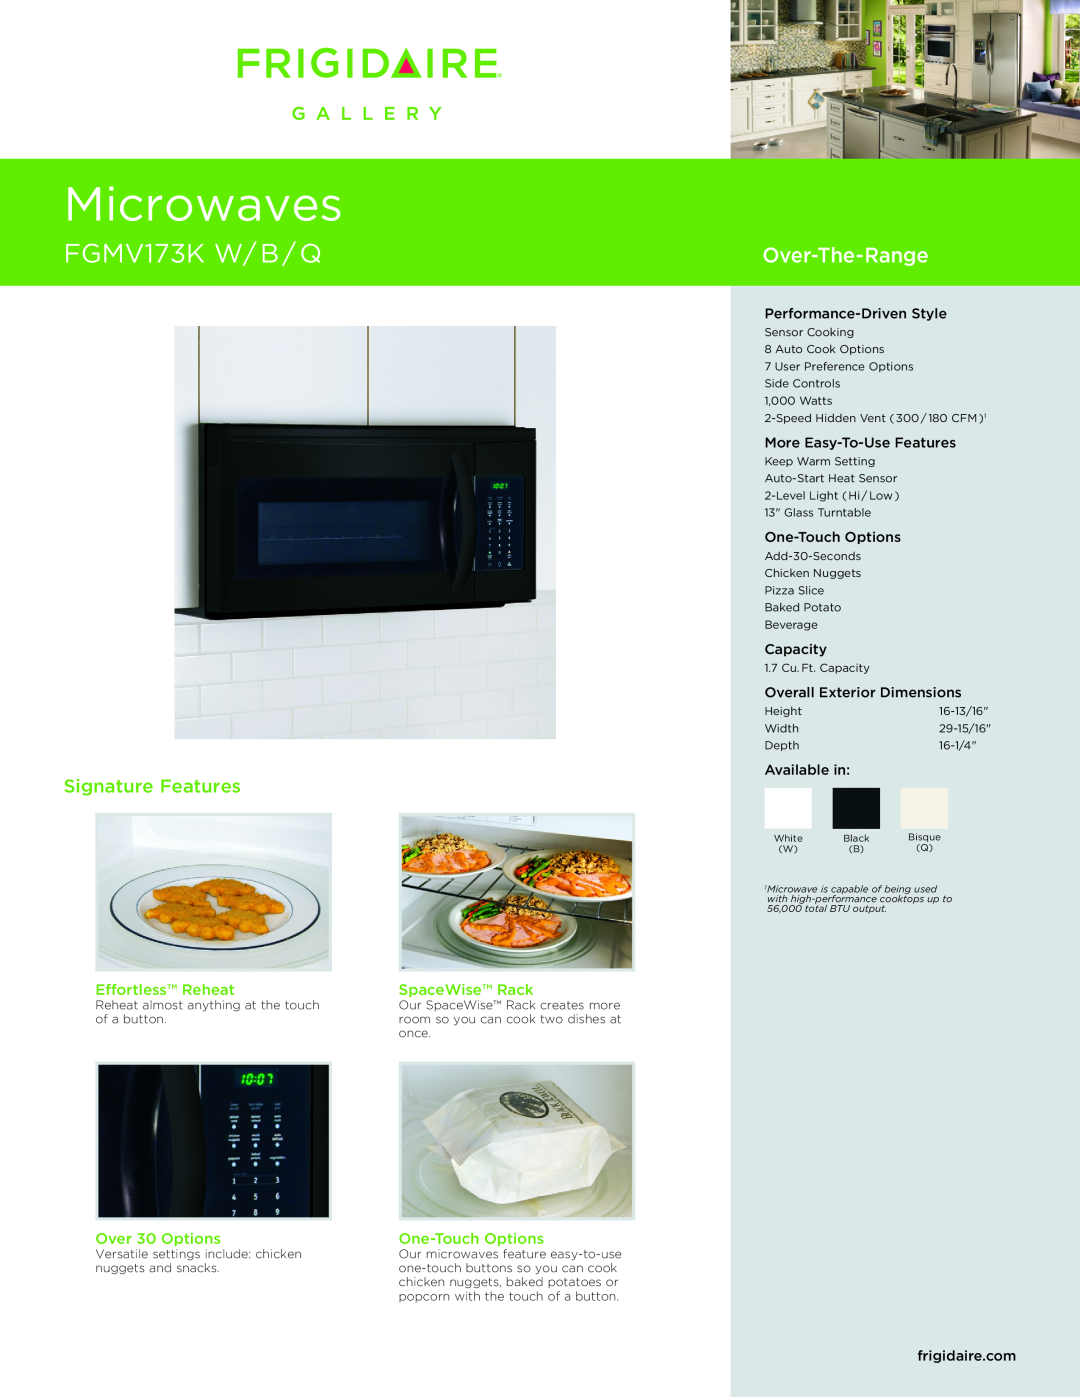 Frigidaire FGMV173K dimensions Effortless Reheat, SpaceWise Rack, Over 30 Options, One-TouchOptions, Capacity, Microwaves 